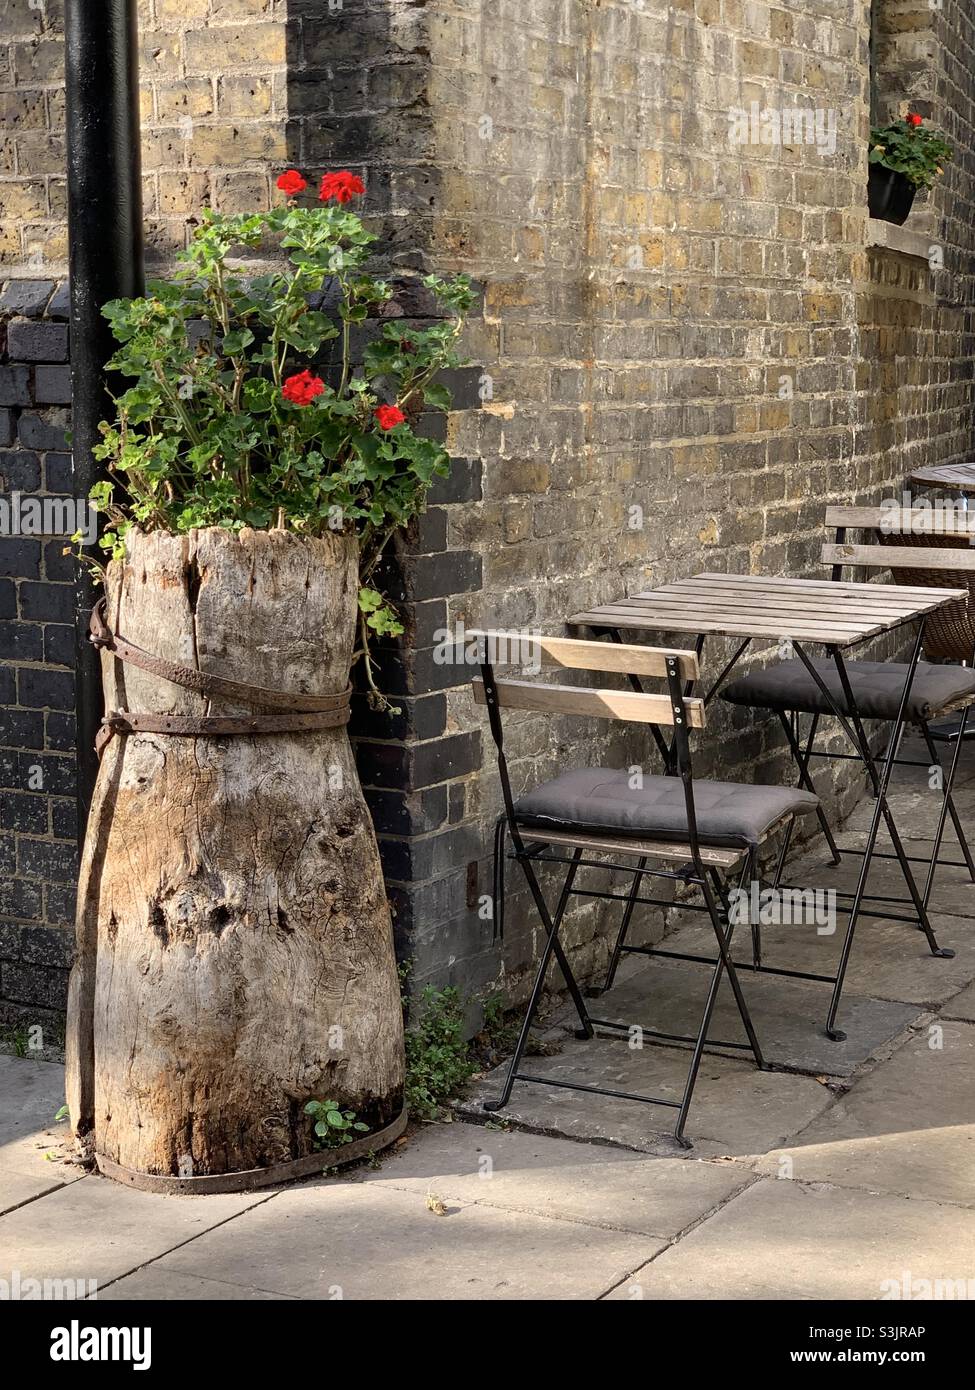 Outside The Mayflower Pub in the borough of Southwark. Corner with an old tree stump. Held together with copper strips. Red Geraniums.  Tables and chairs around the corner. Sunshine Stock Photo